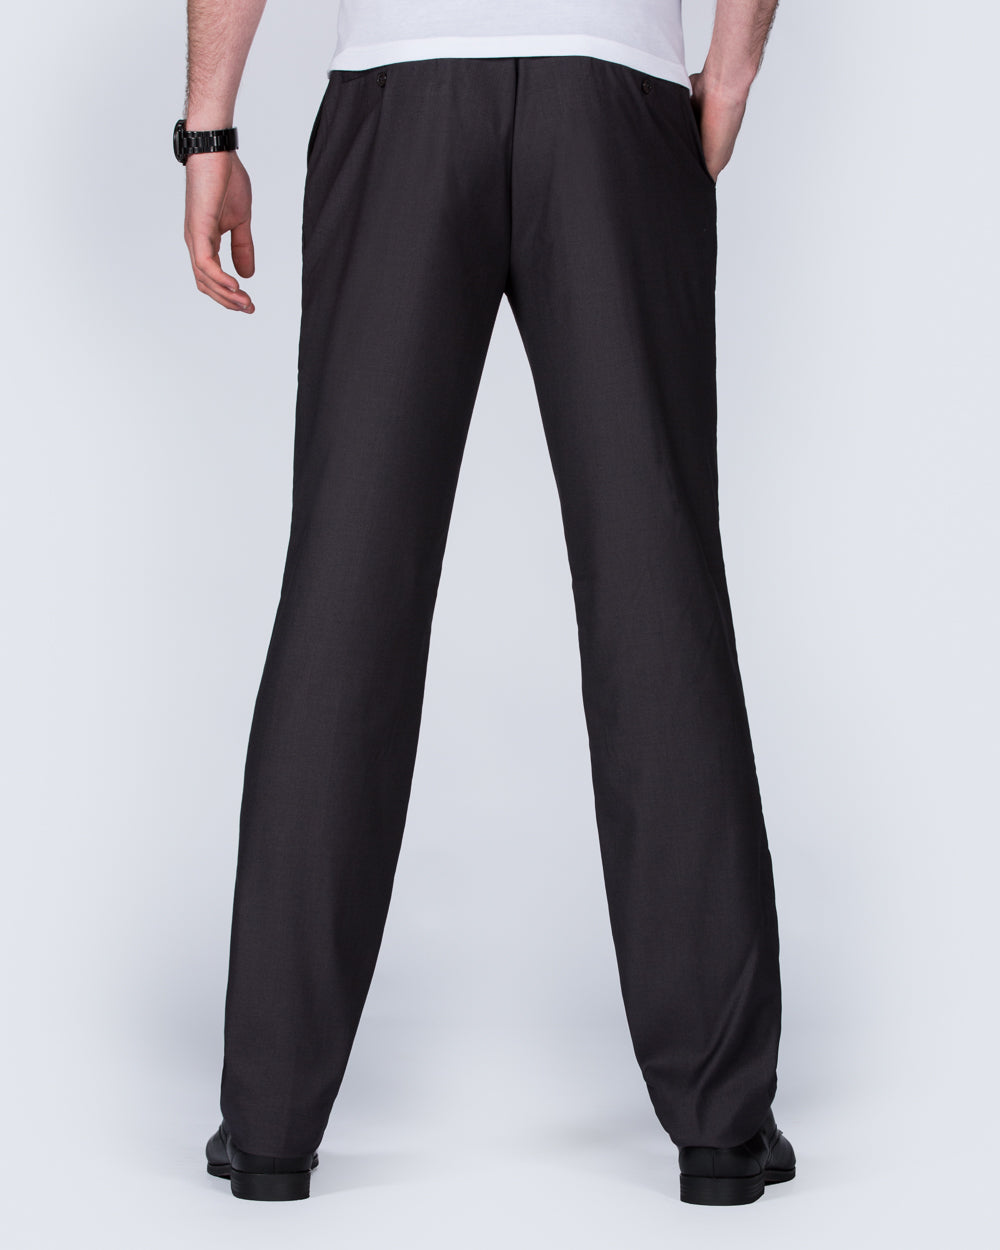 2t Regular Fit Tall Trousers (charcoal)